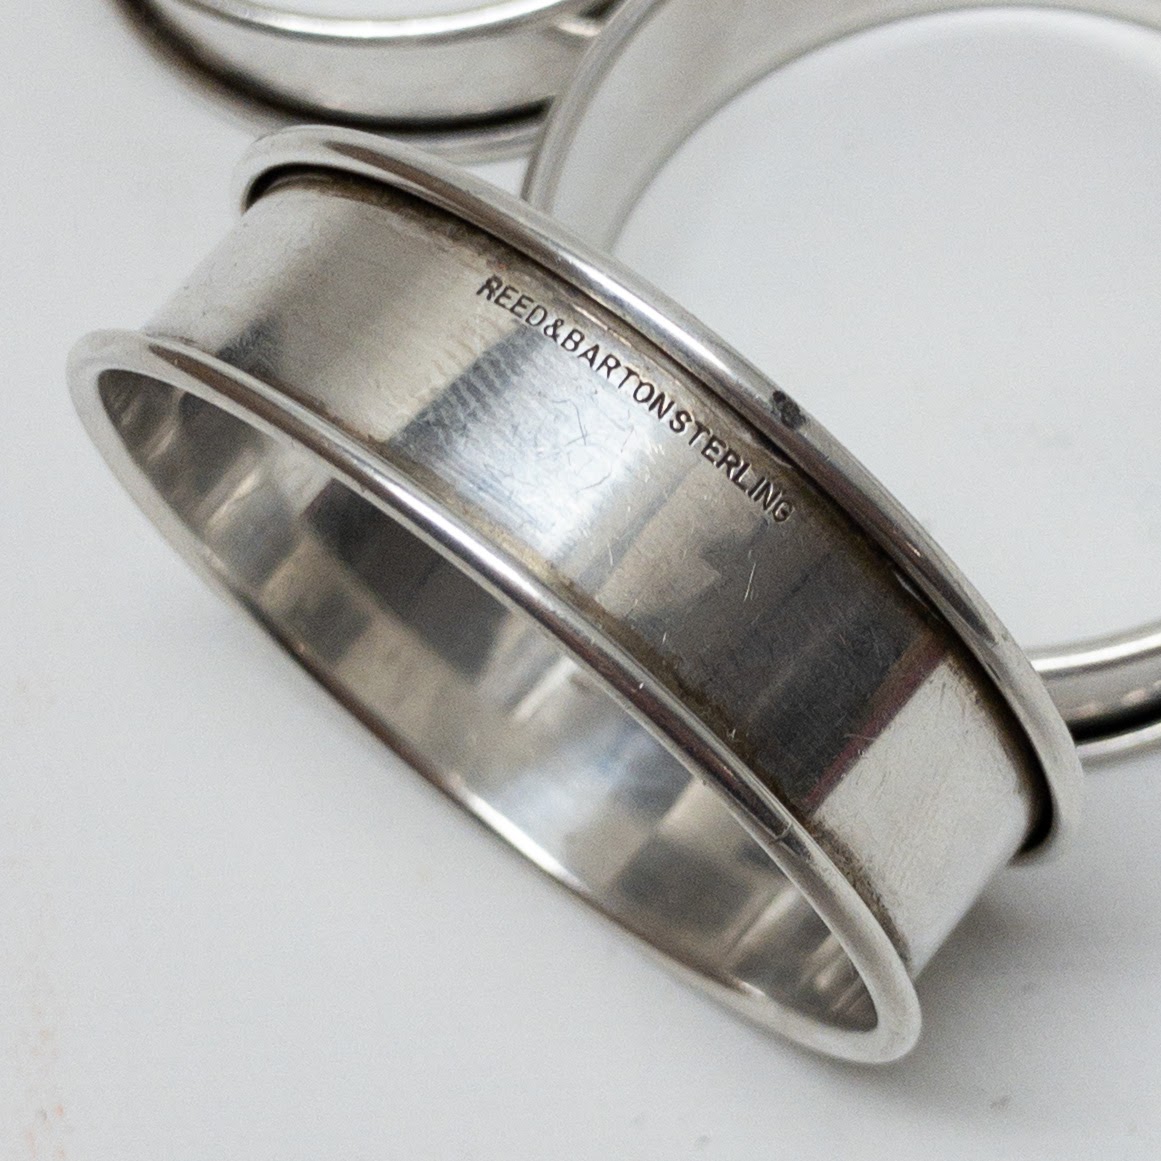 Sterling Silver Reed and Barton Napkin Ring Set